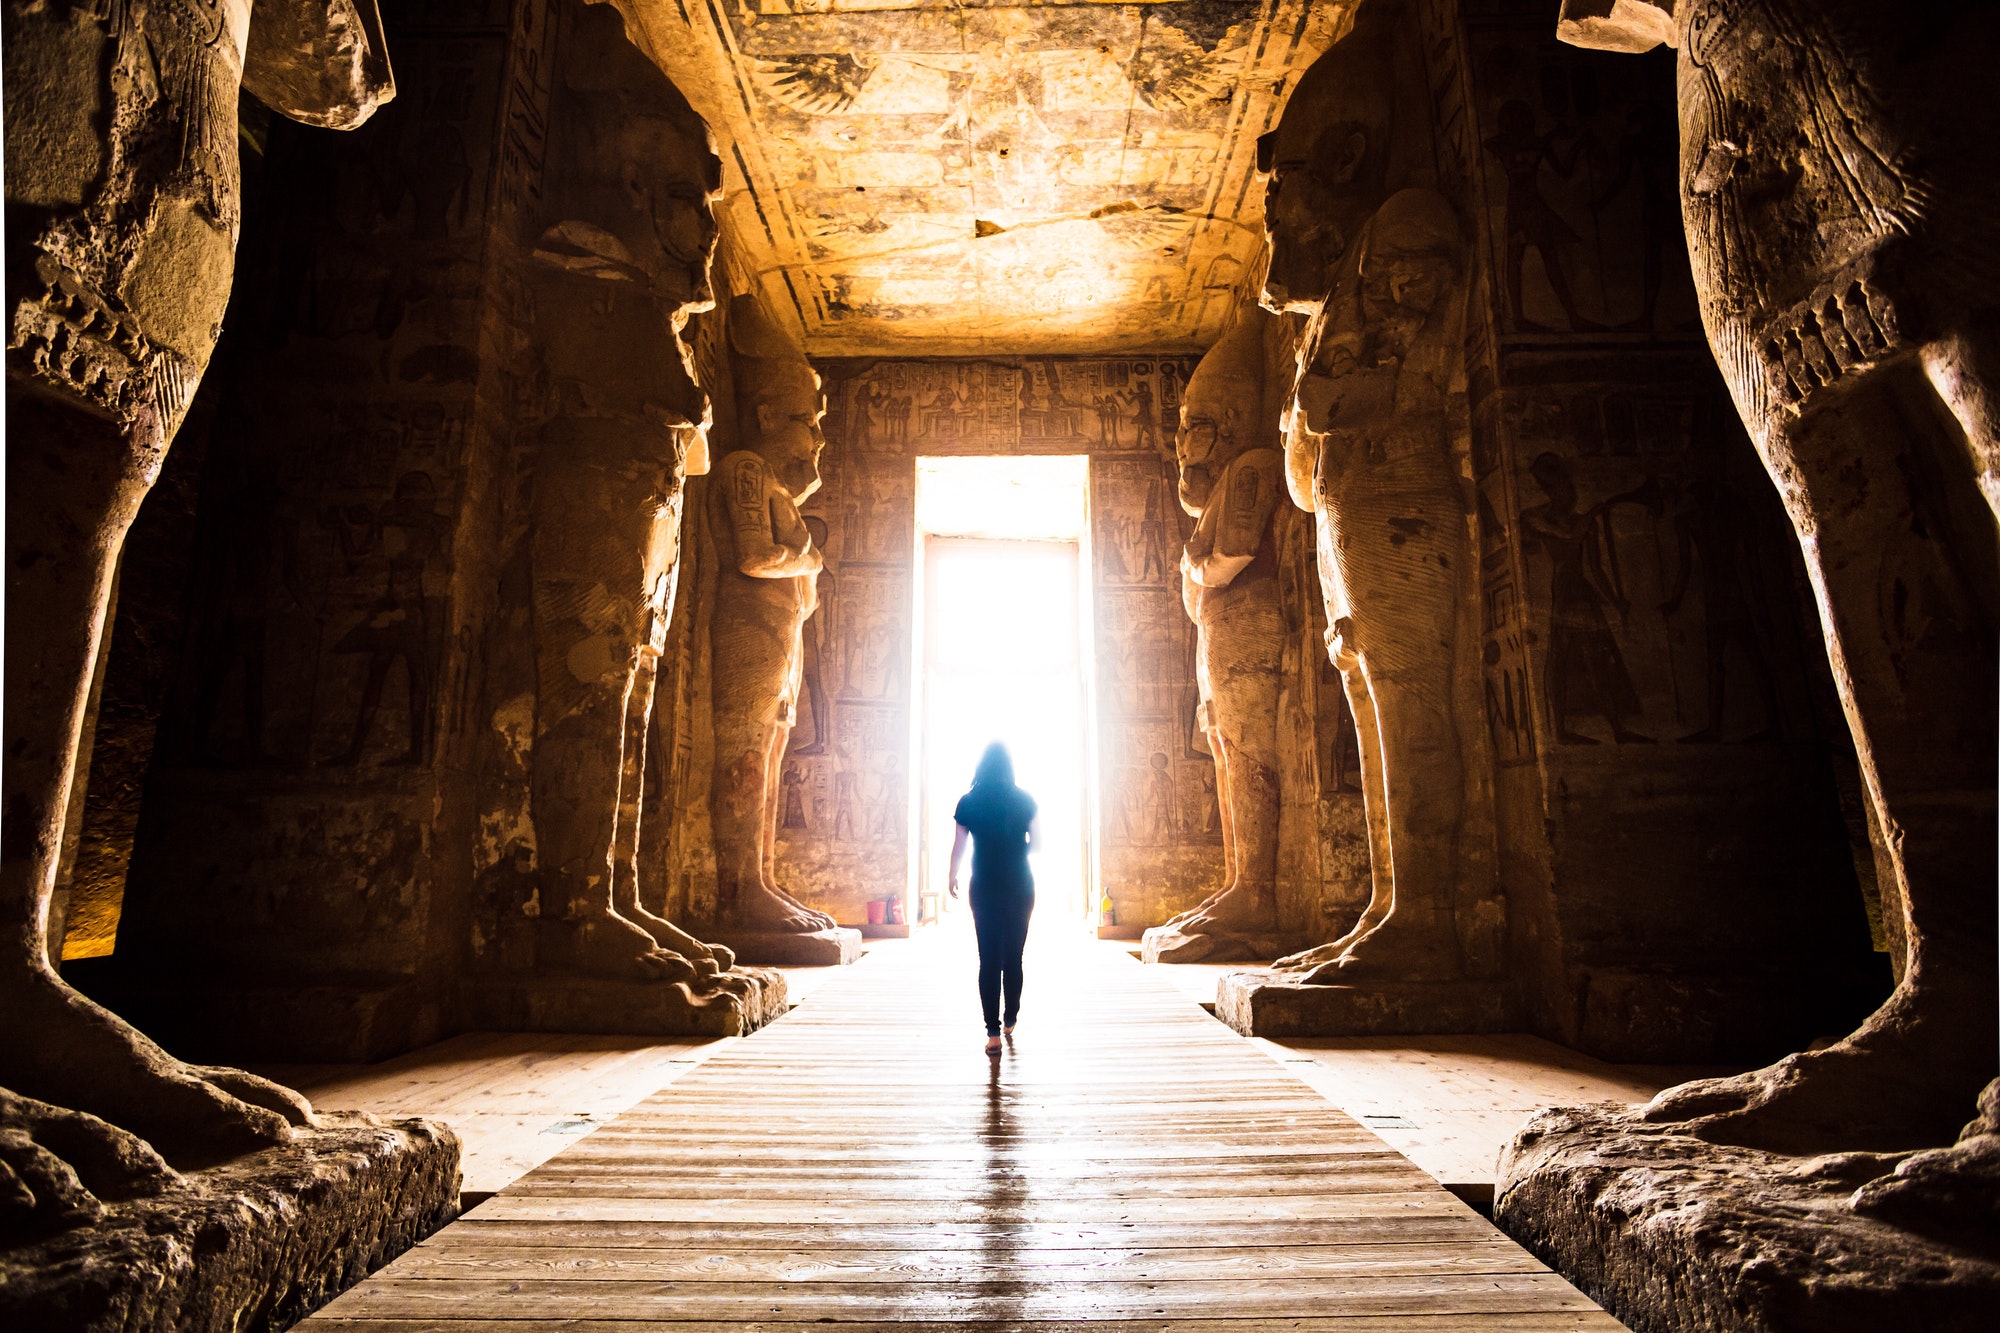 Towards the light in ancient Egypt